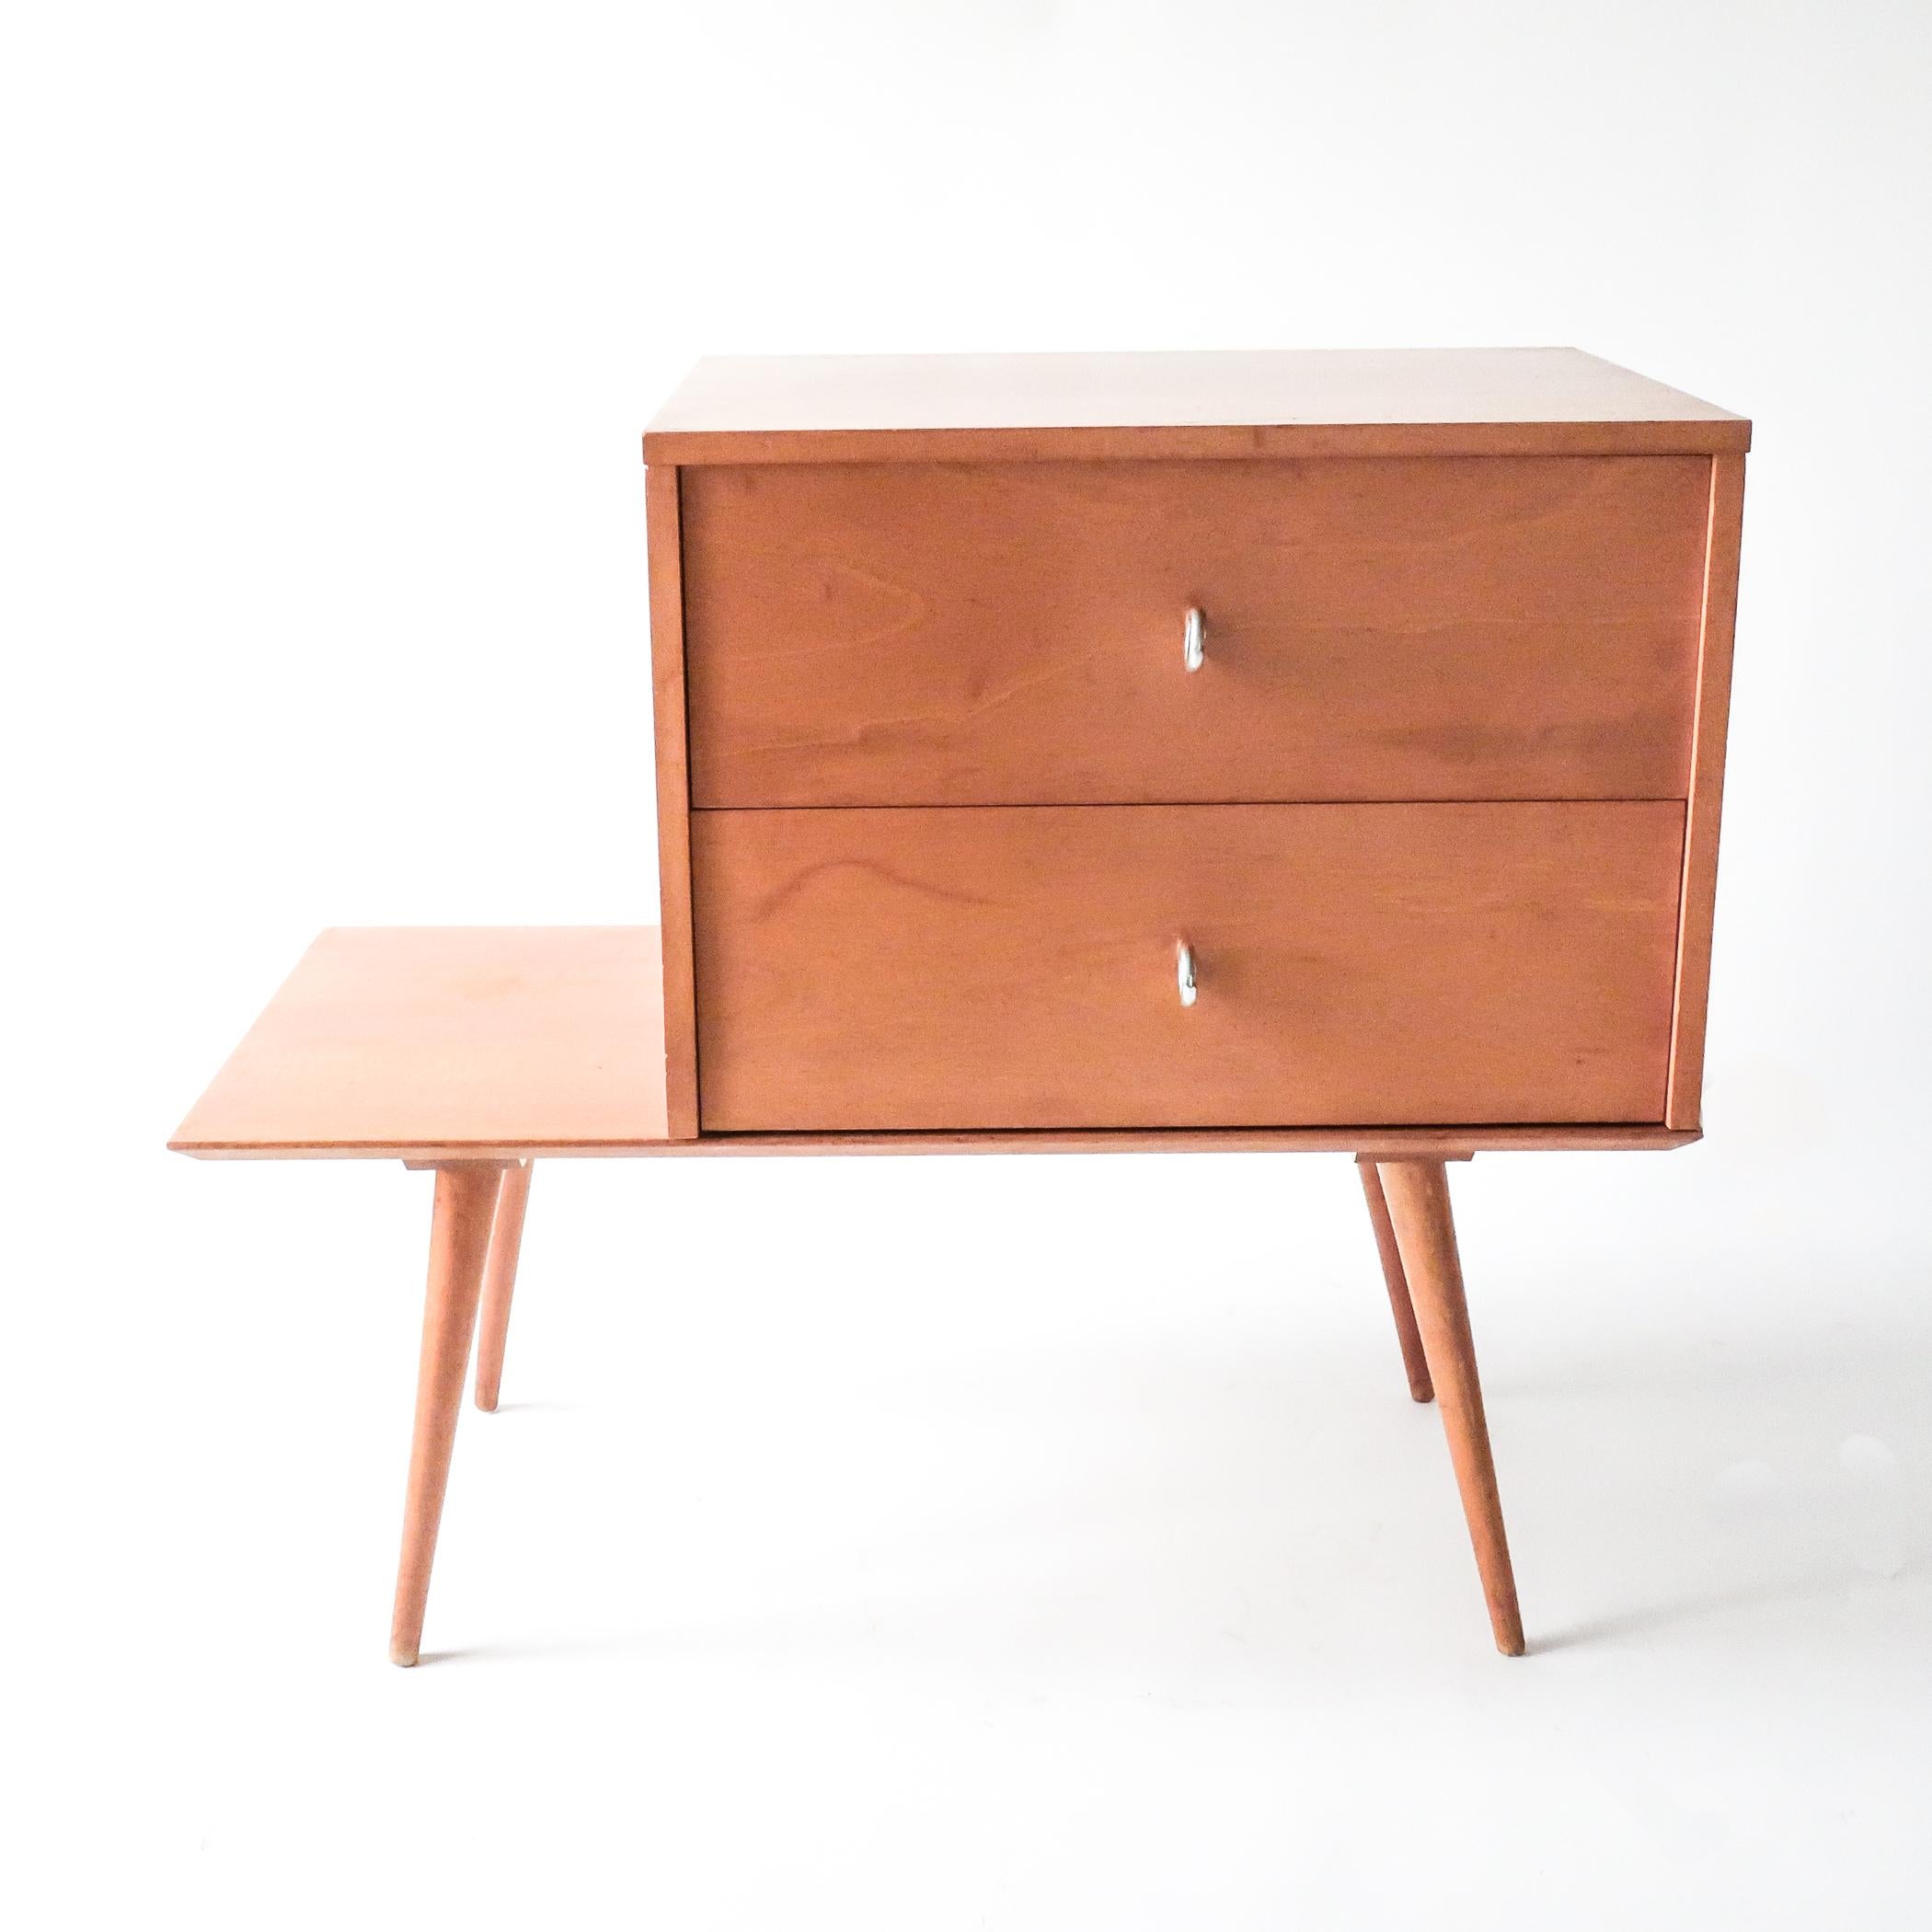 Paul McCobb two-drawer chest on a low table from his Planner Group for Winchendon, his most popular line from the 1950s. The components from this line are interchangeable--the chest section can sit on either the right or left side of the base. In